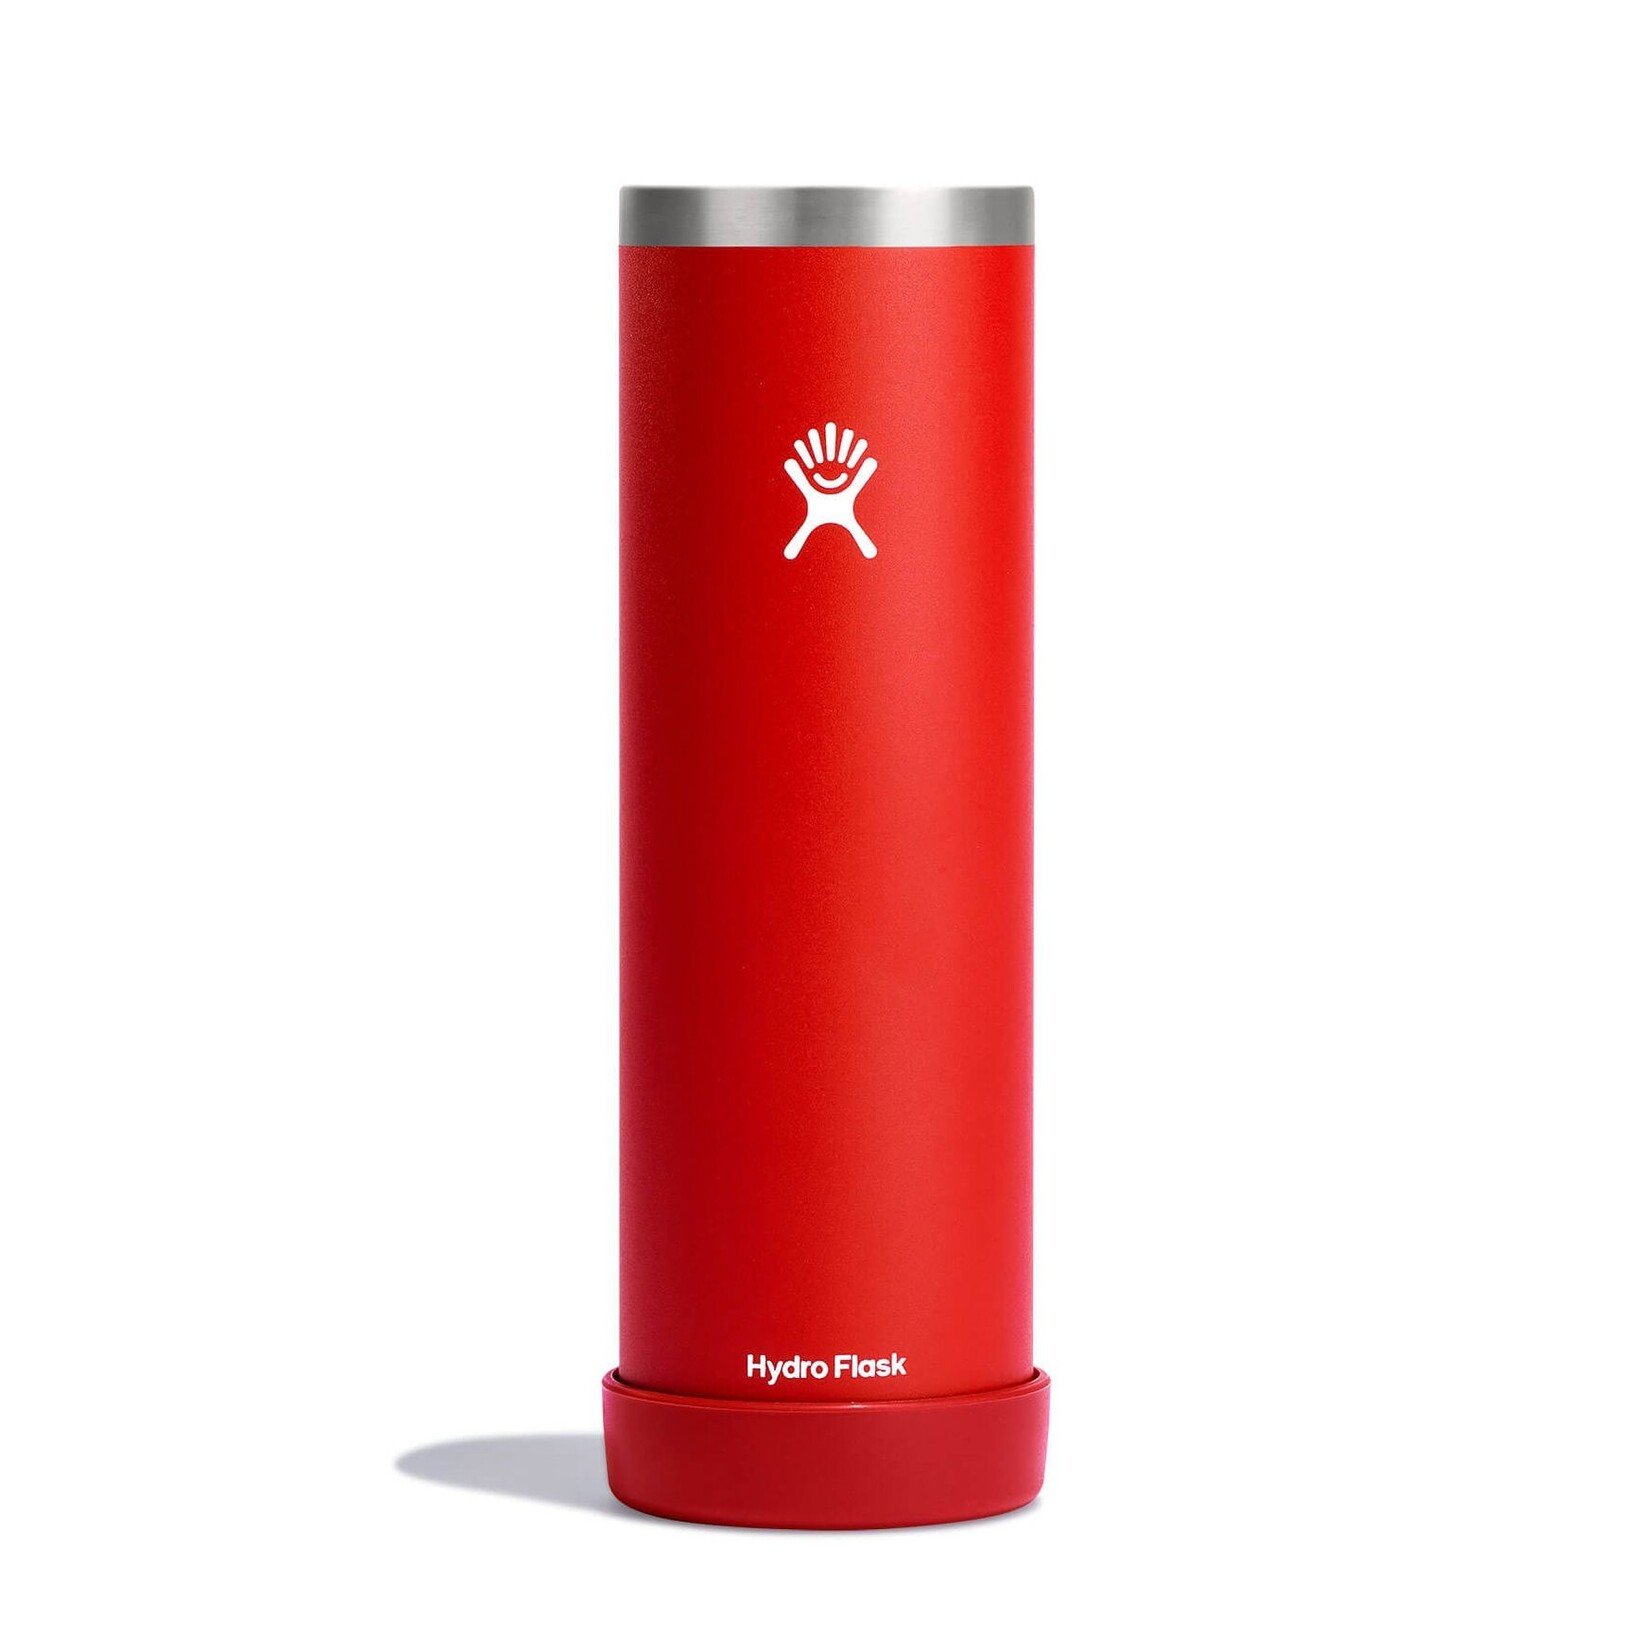 Hydro Flask Hydro Flask Tandem Cooler Cup